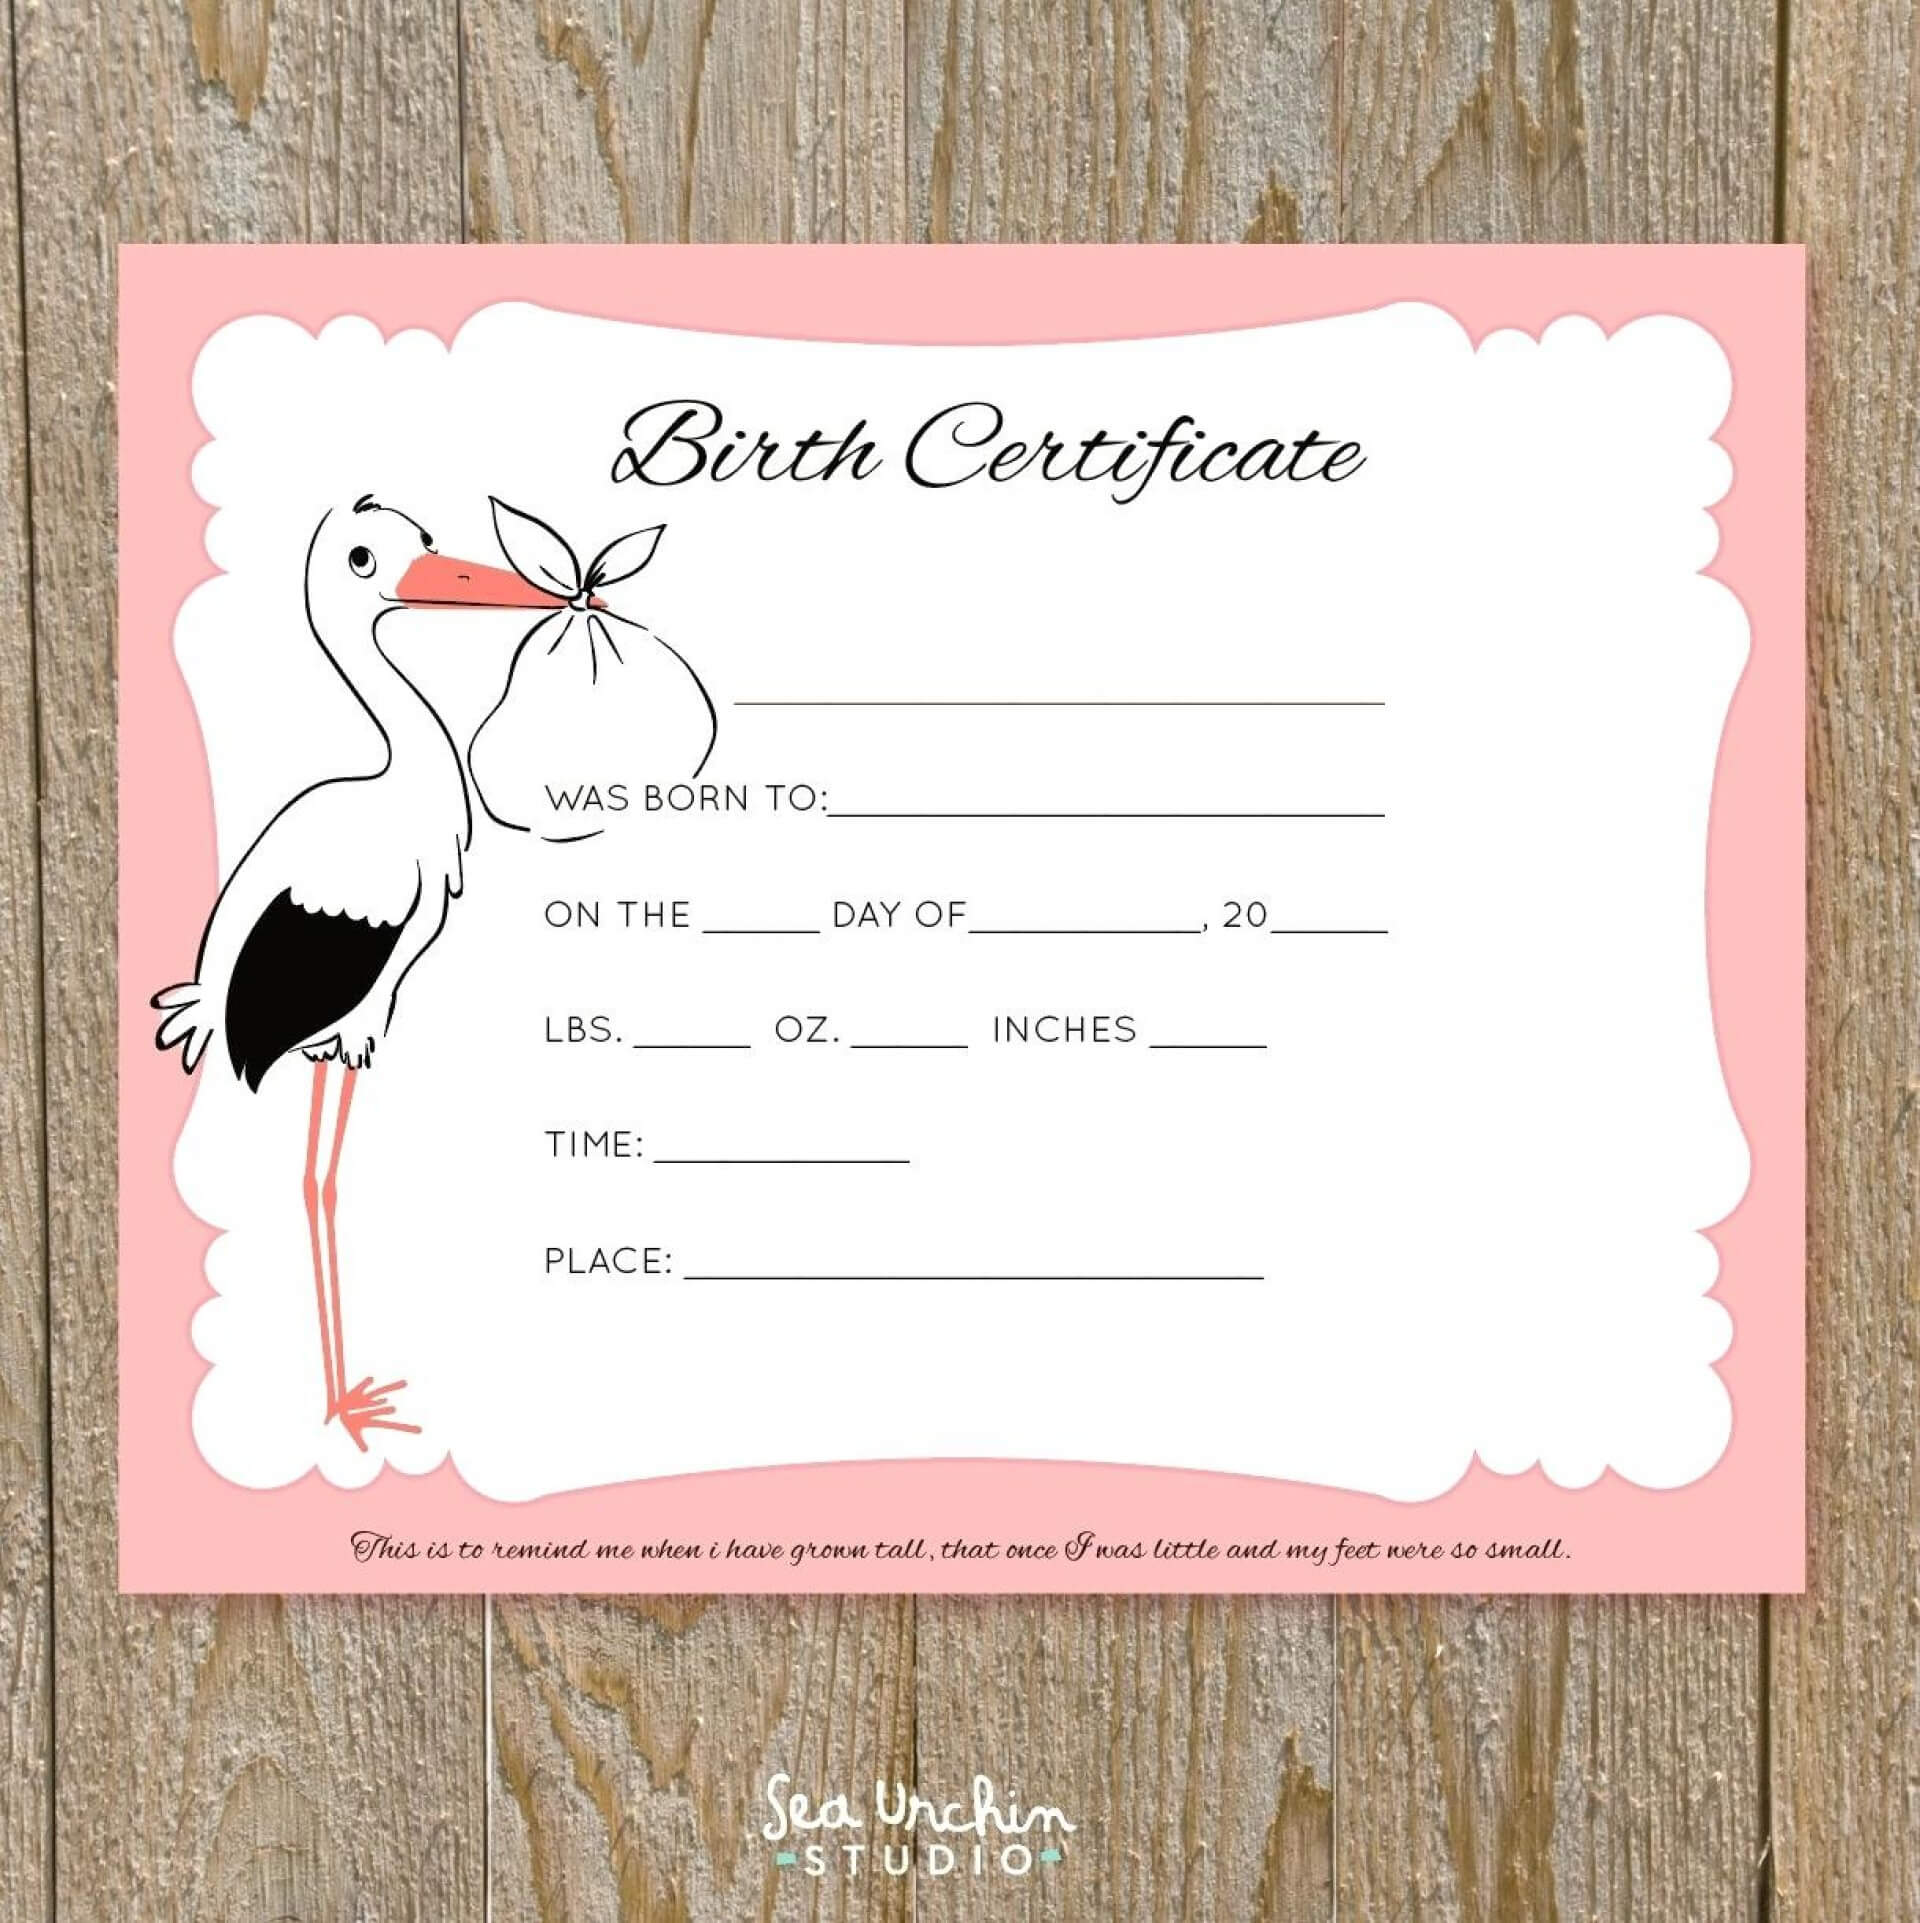 Impressive Free Birth Certificate Template Ideas Puppy Throughout Baby Doll Birth Certificate Template